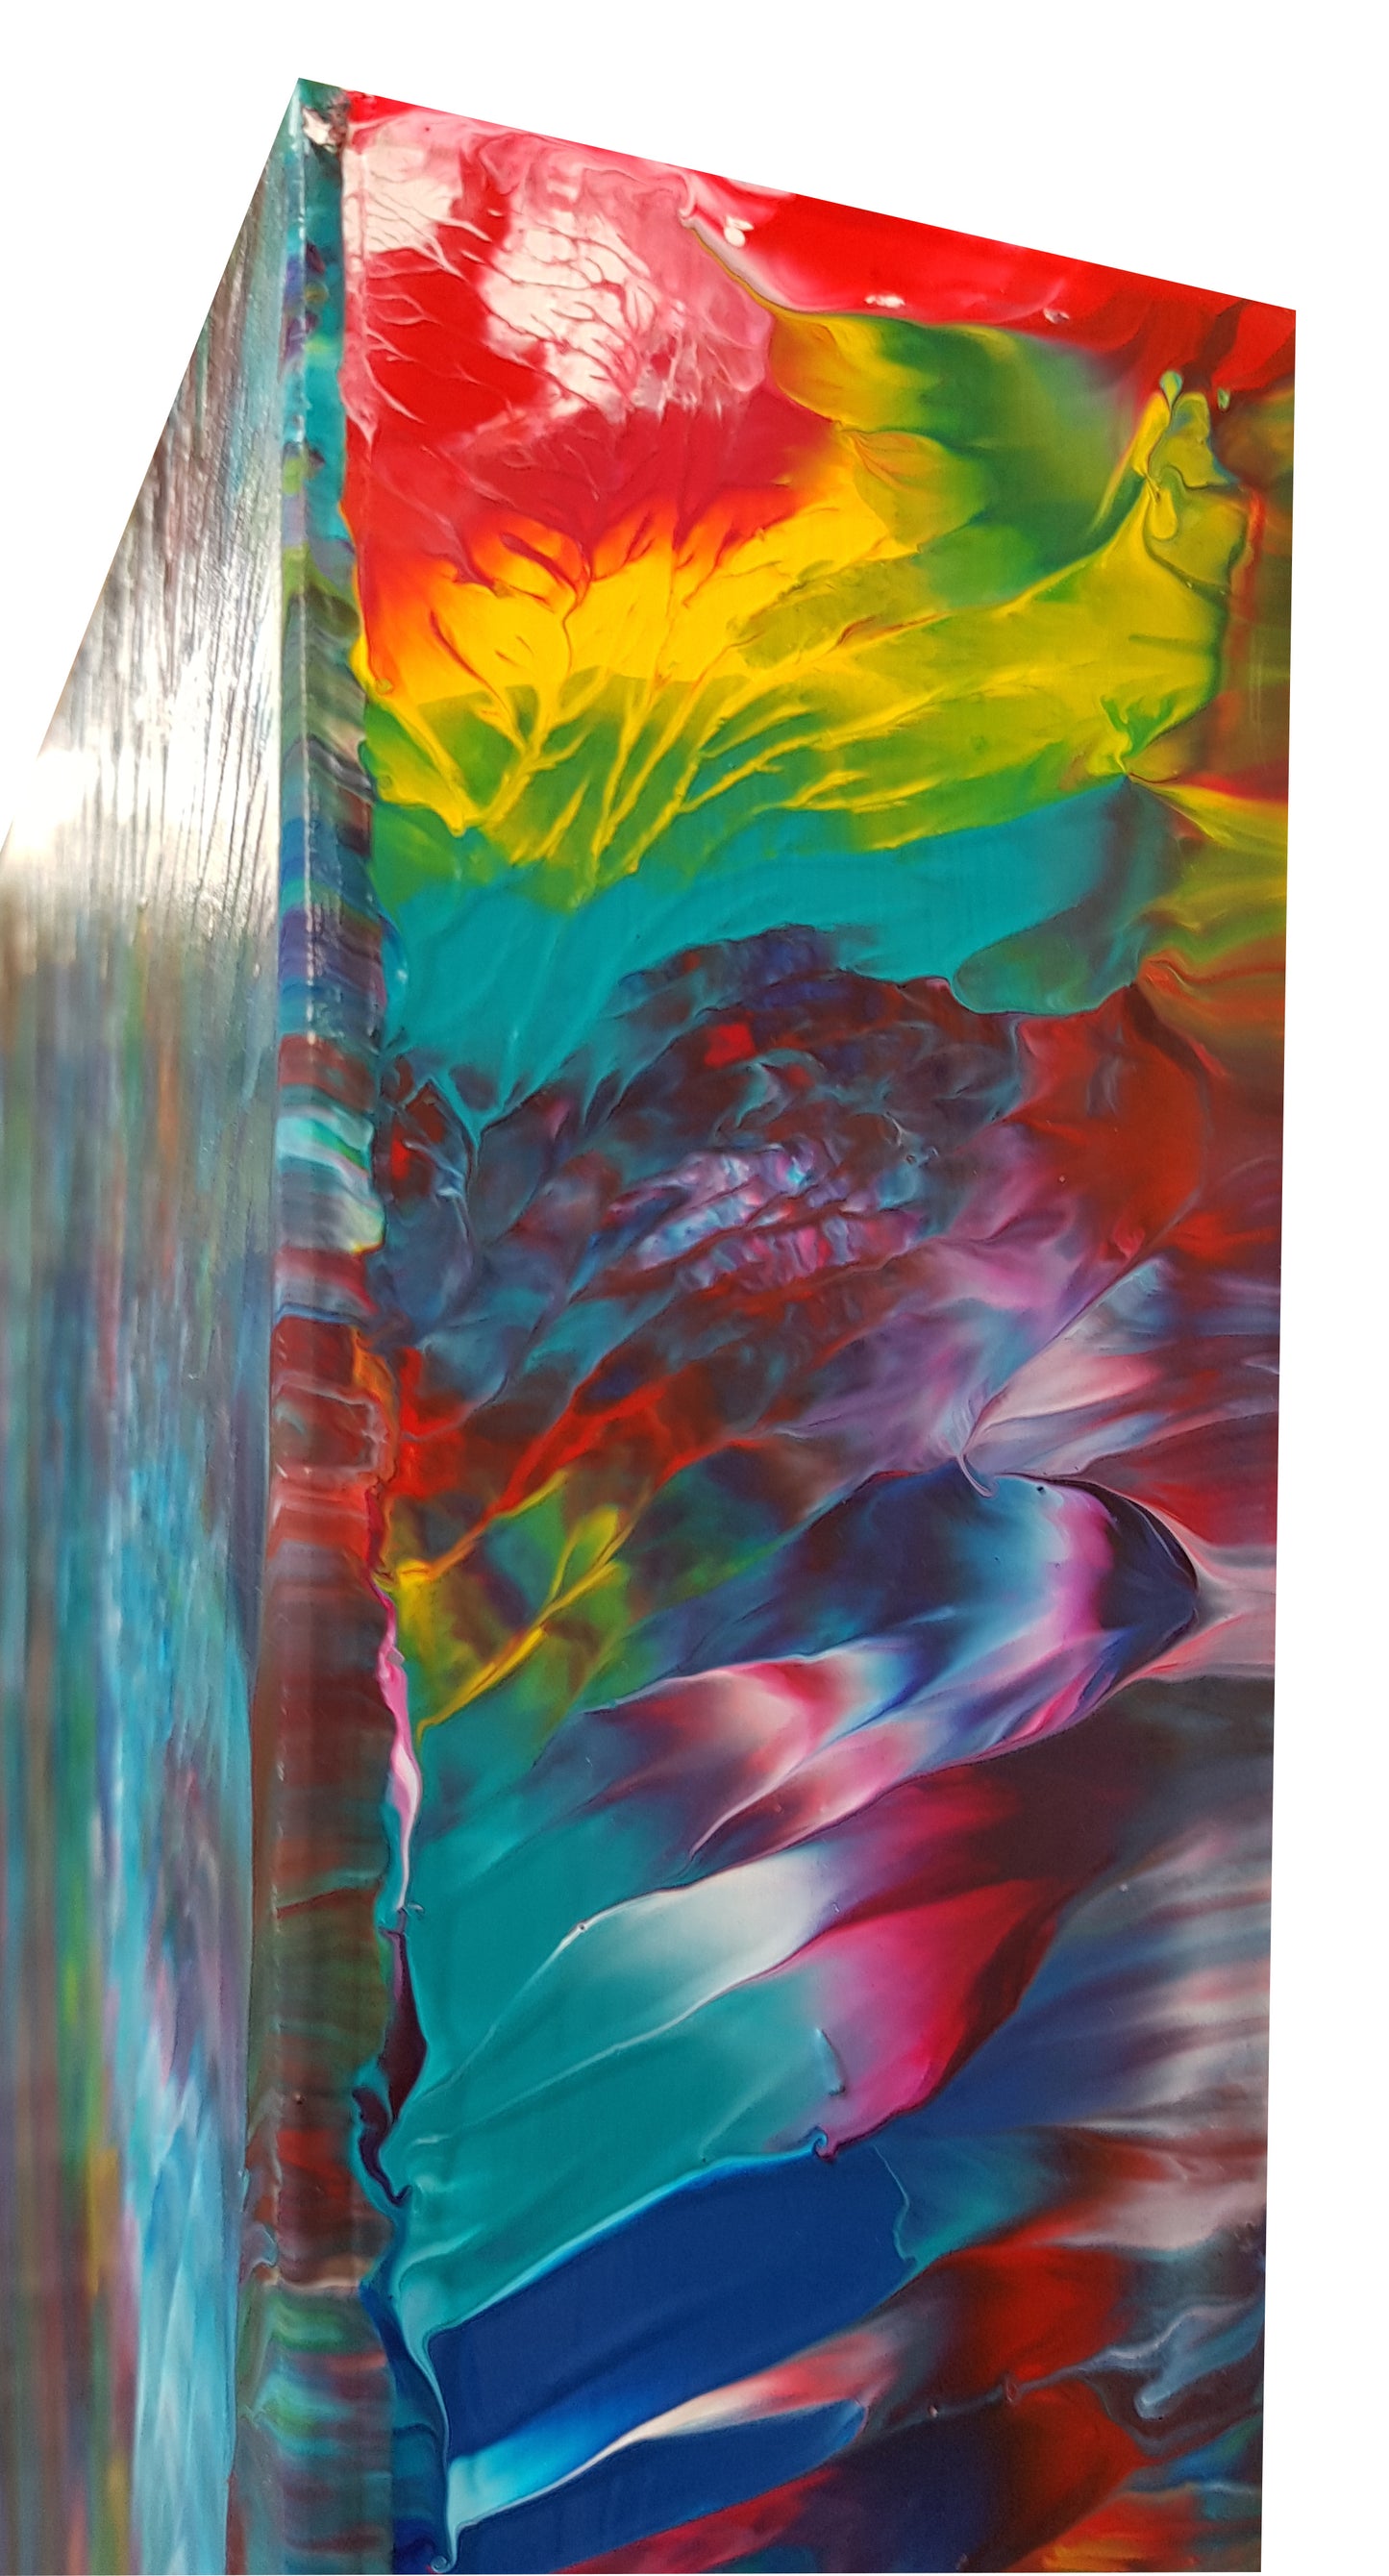 Psychedelic-Waterfall-No.-3-by-Alexandra-Romano-Art-Original-One-of-a-Kind-Abstract-Expressionism-Paintings-Buy-Affordable-Artwork-Toronto Art Gallery Colourful Canvas Artworks